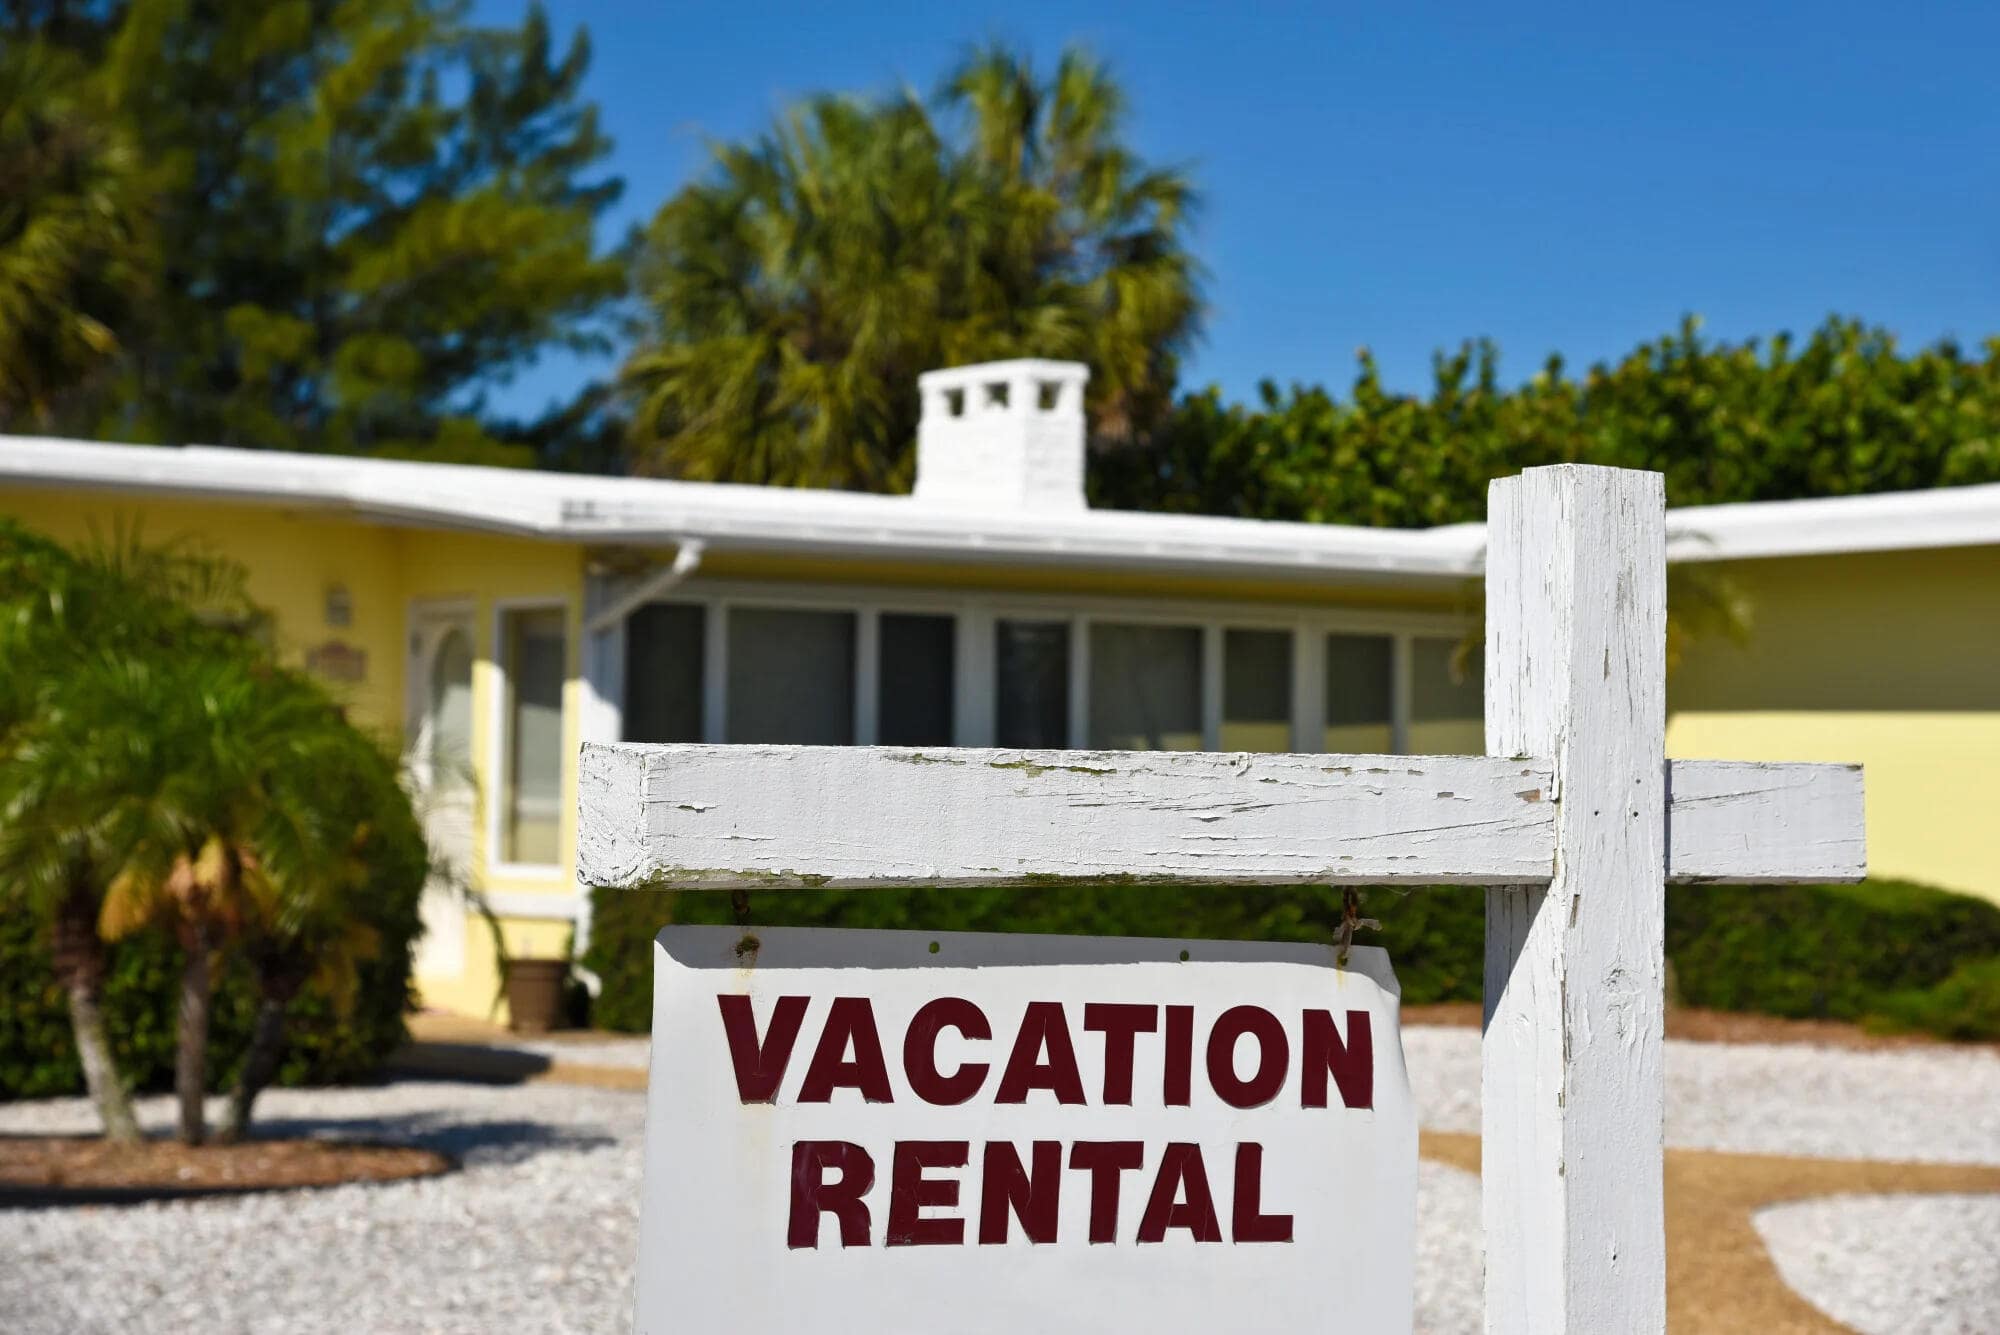 Communication Tips for Vacation Rental Hosts in Wilmington